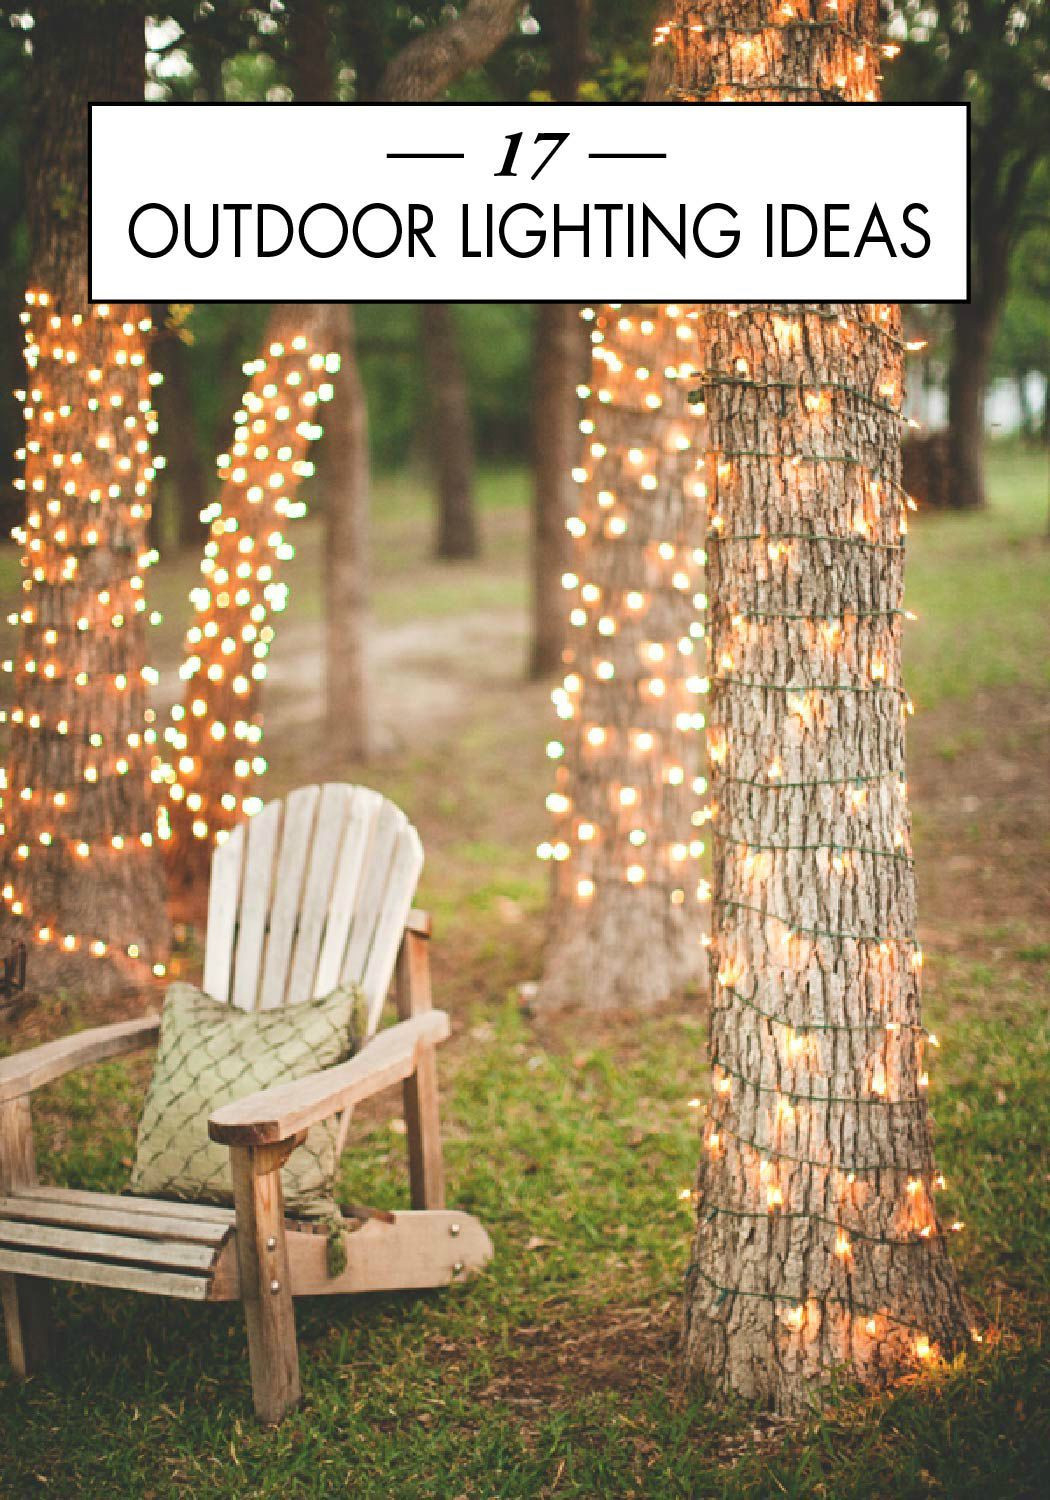 Outdoor Lighting Ideas For Backyard Party
 Use some of these 17 beautiful Outdoor Lighting Ideas to